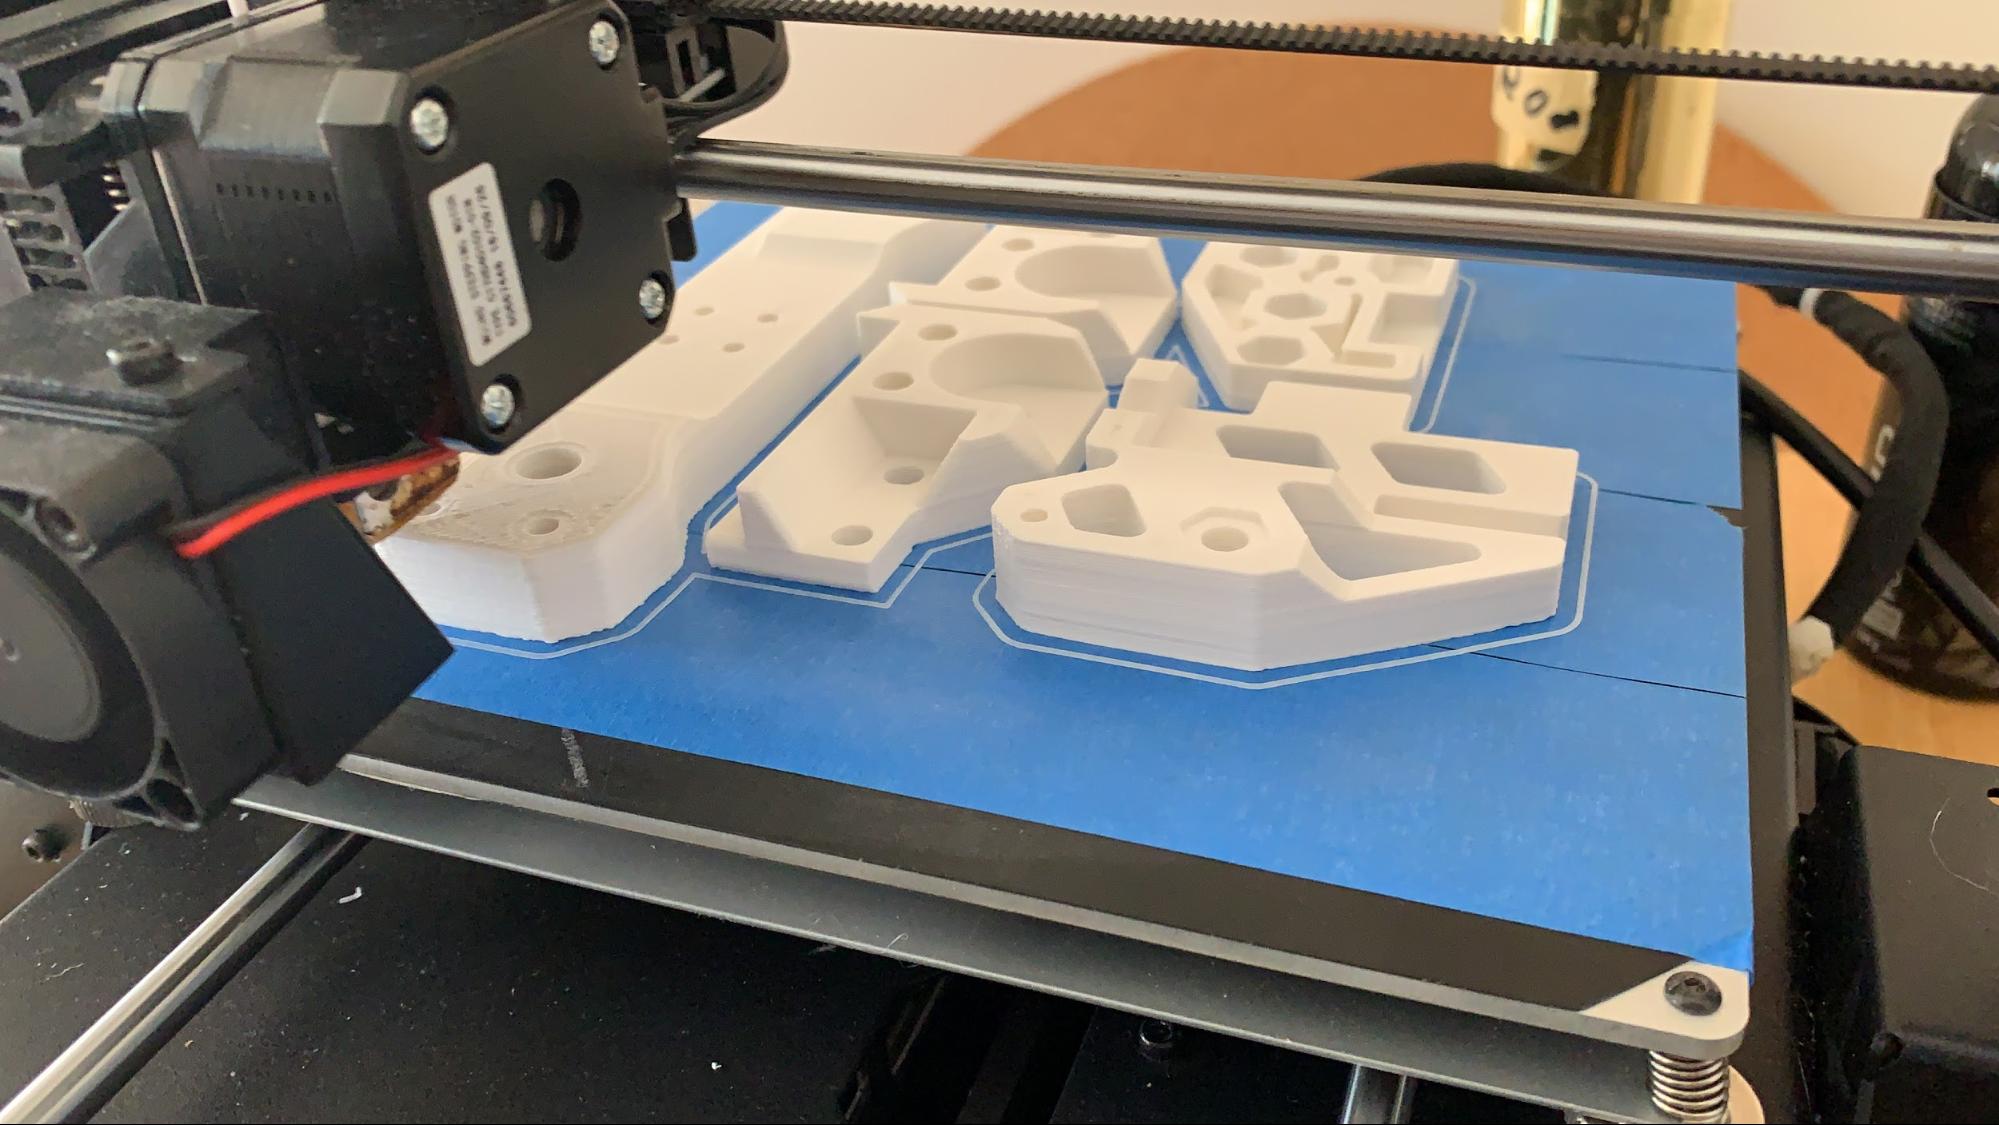 A multipart assembly 3D printing